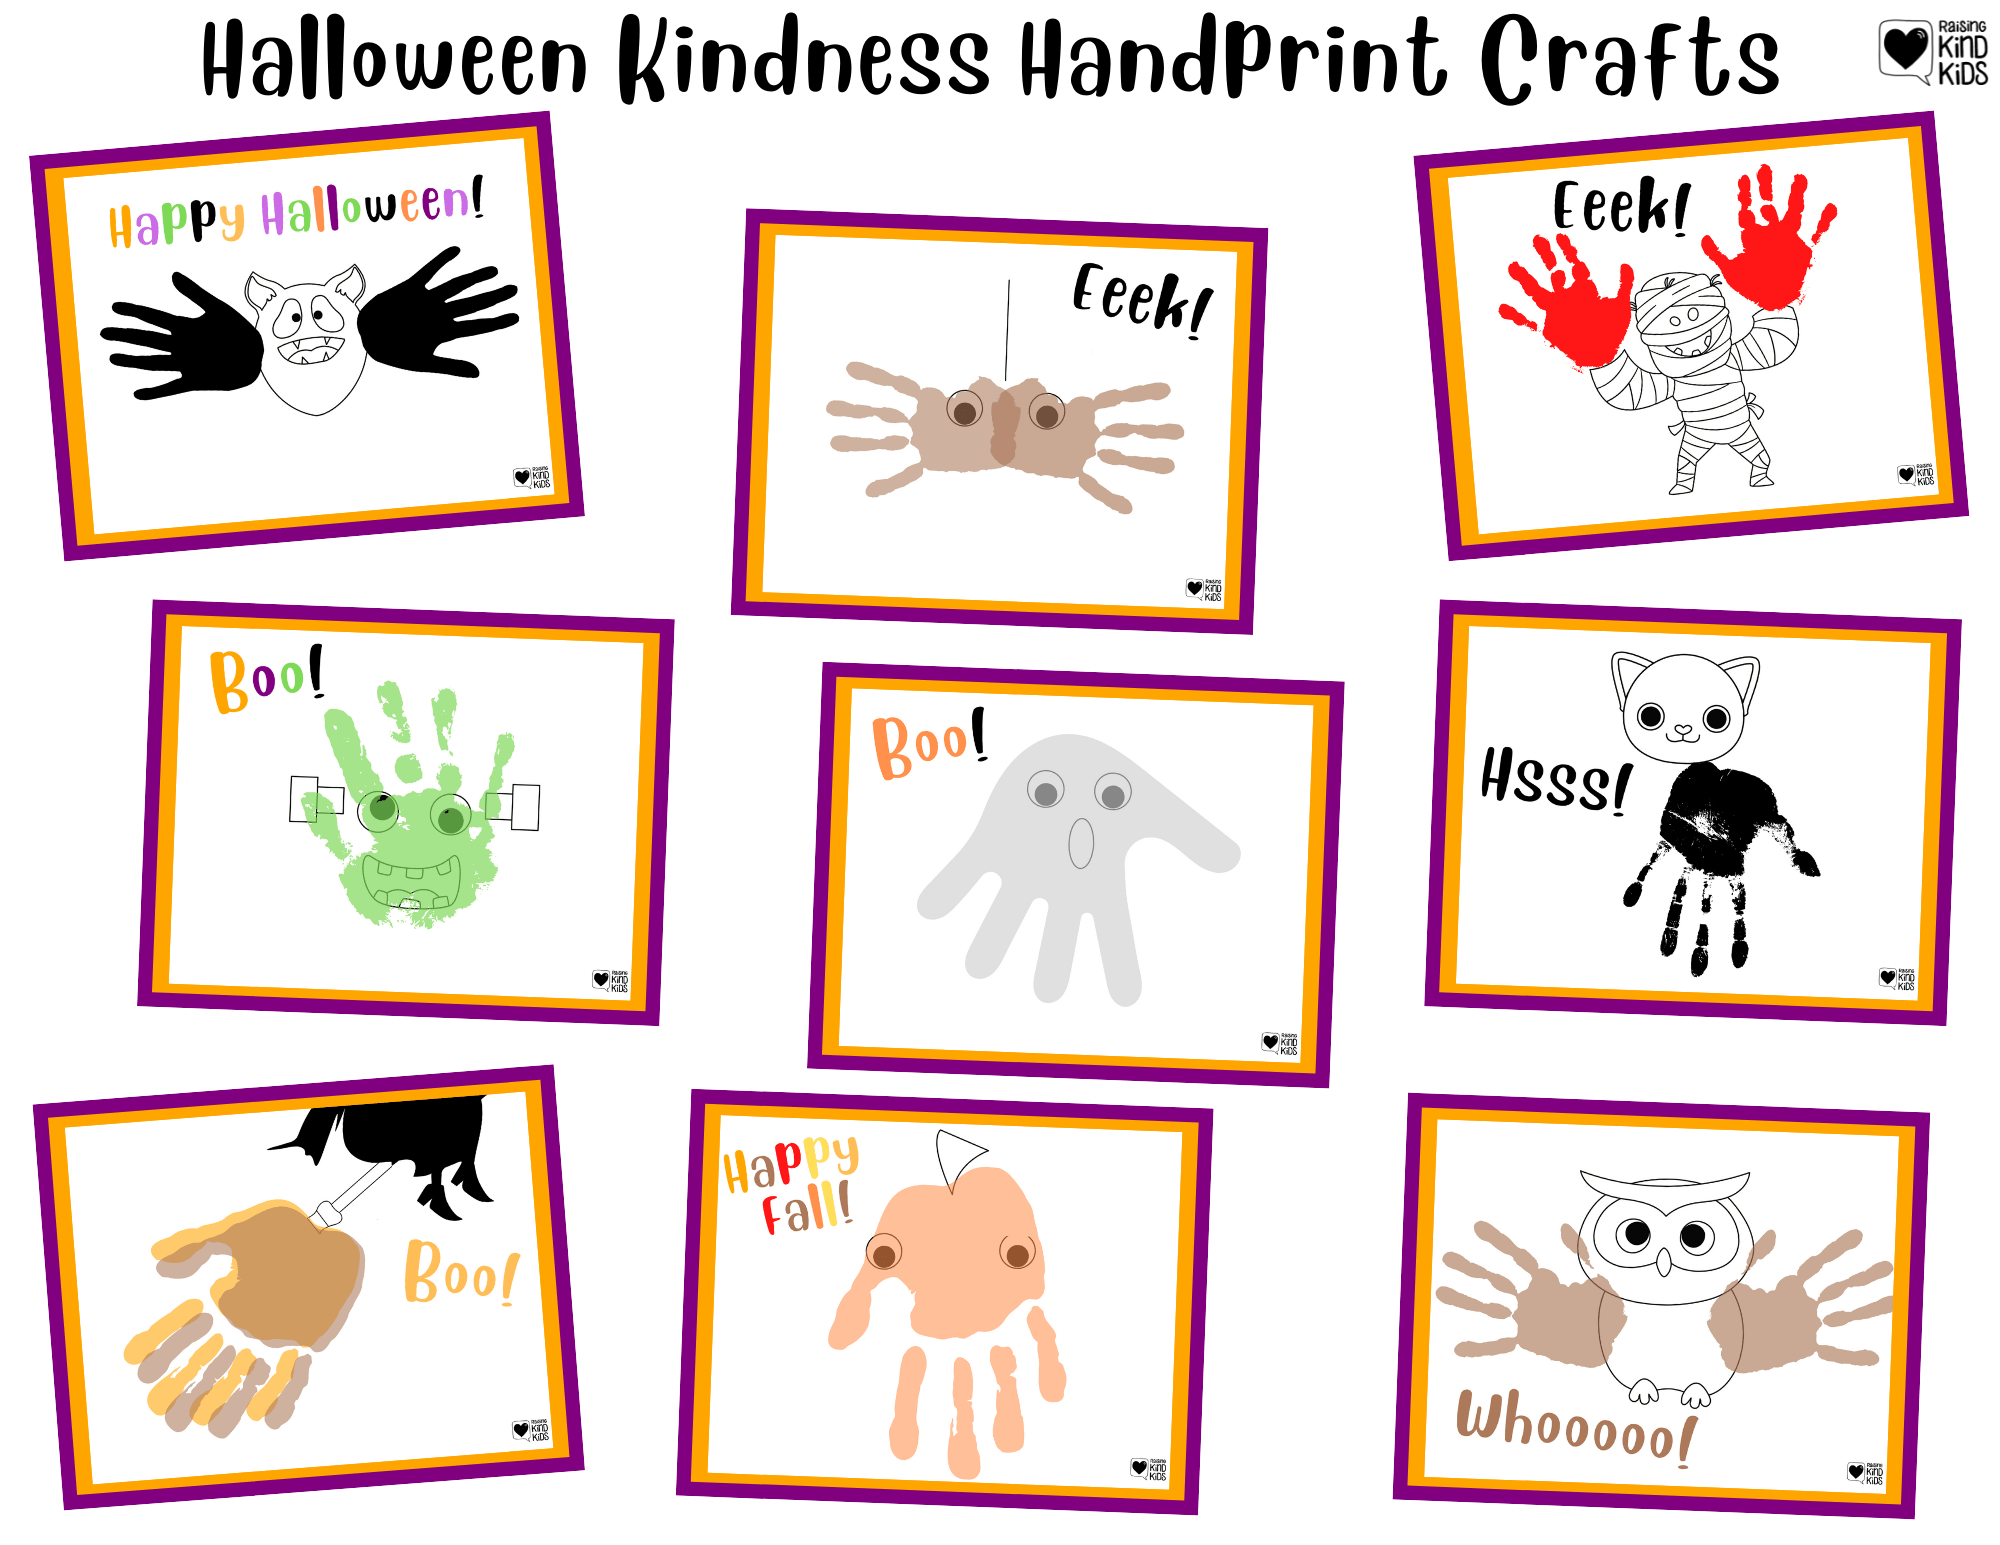 Use these Halloween handprint Kindness craft to celebrate Halloween and spread Kindness at the same time